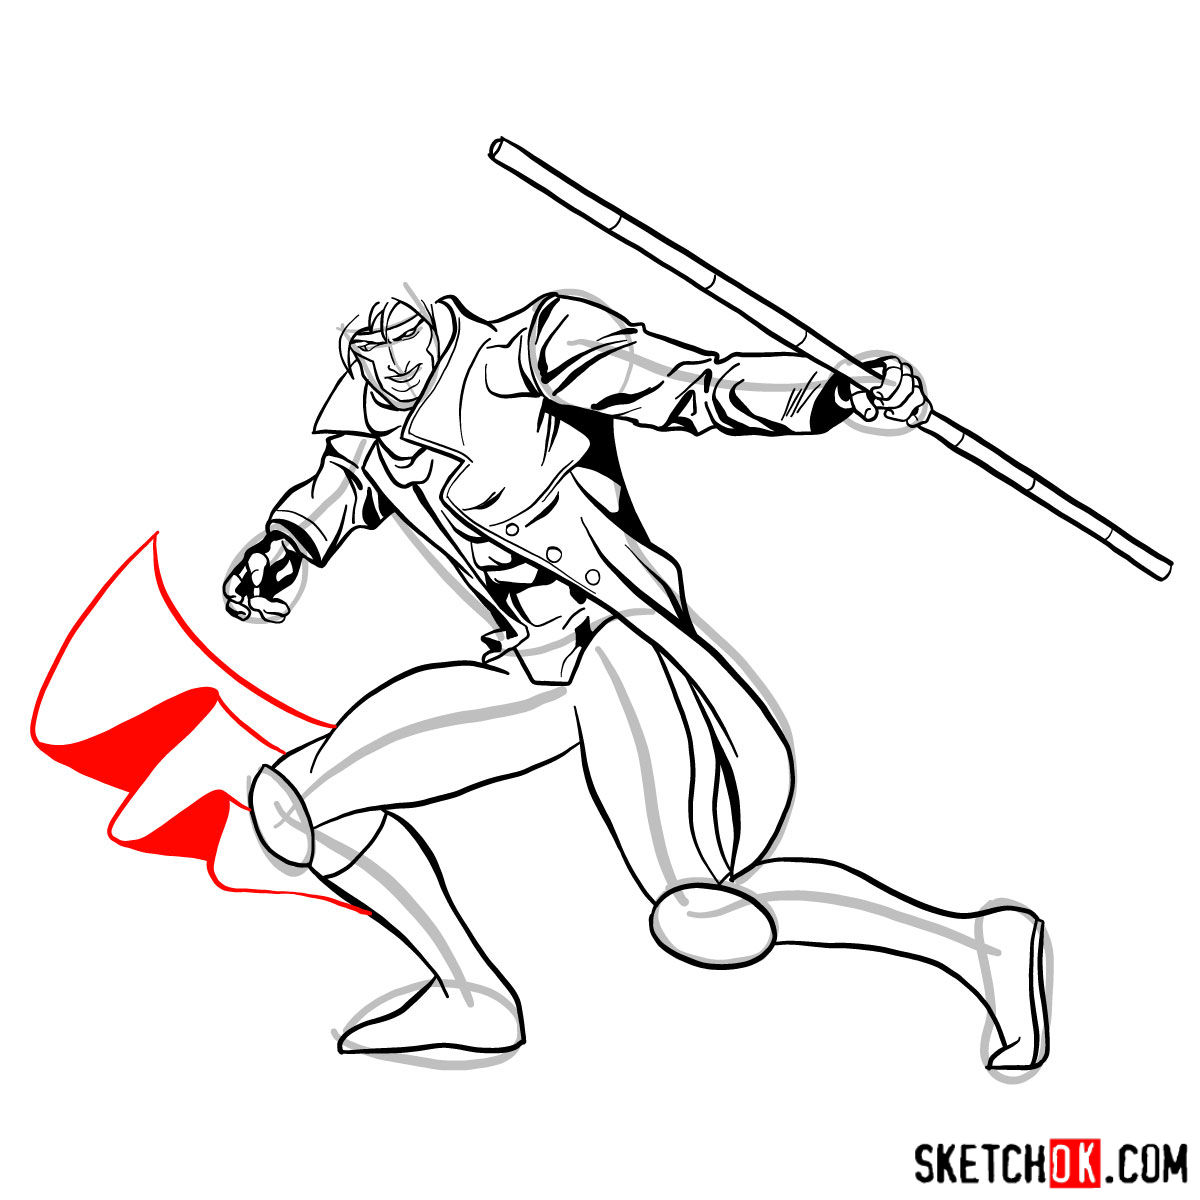 How to draw Gambit from X-Men comics - step 12